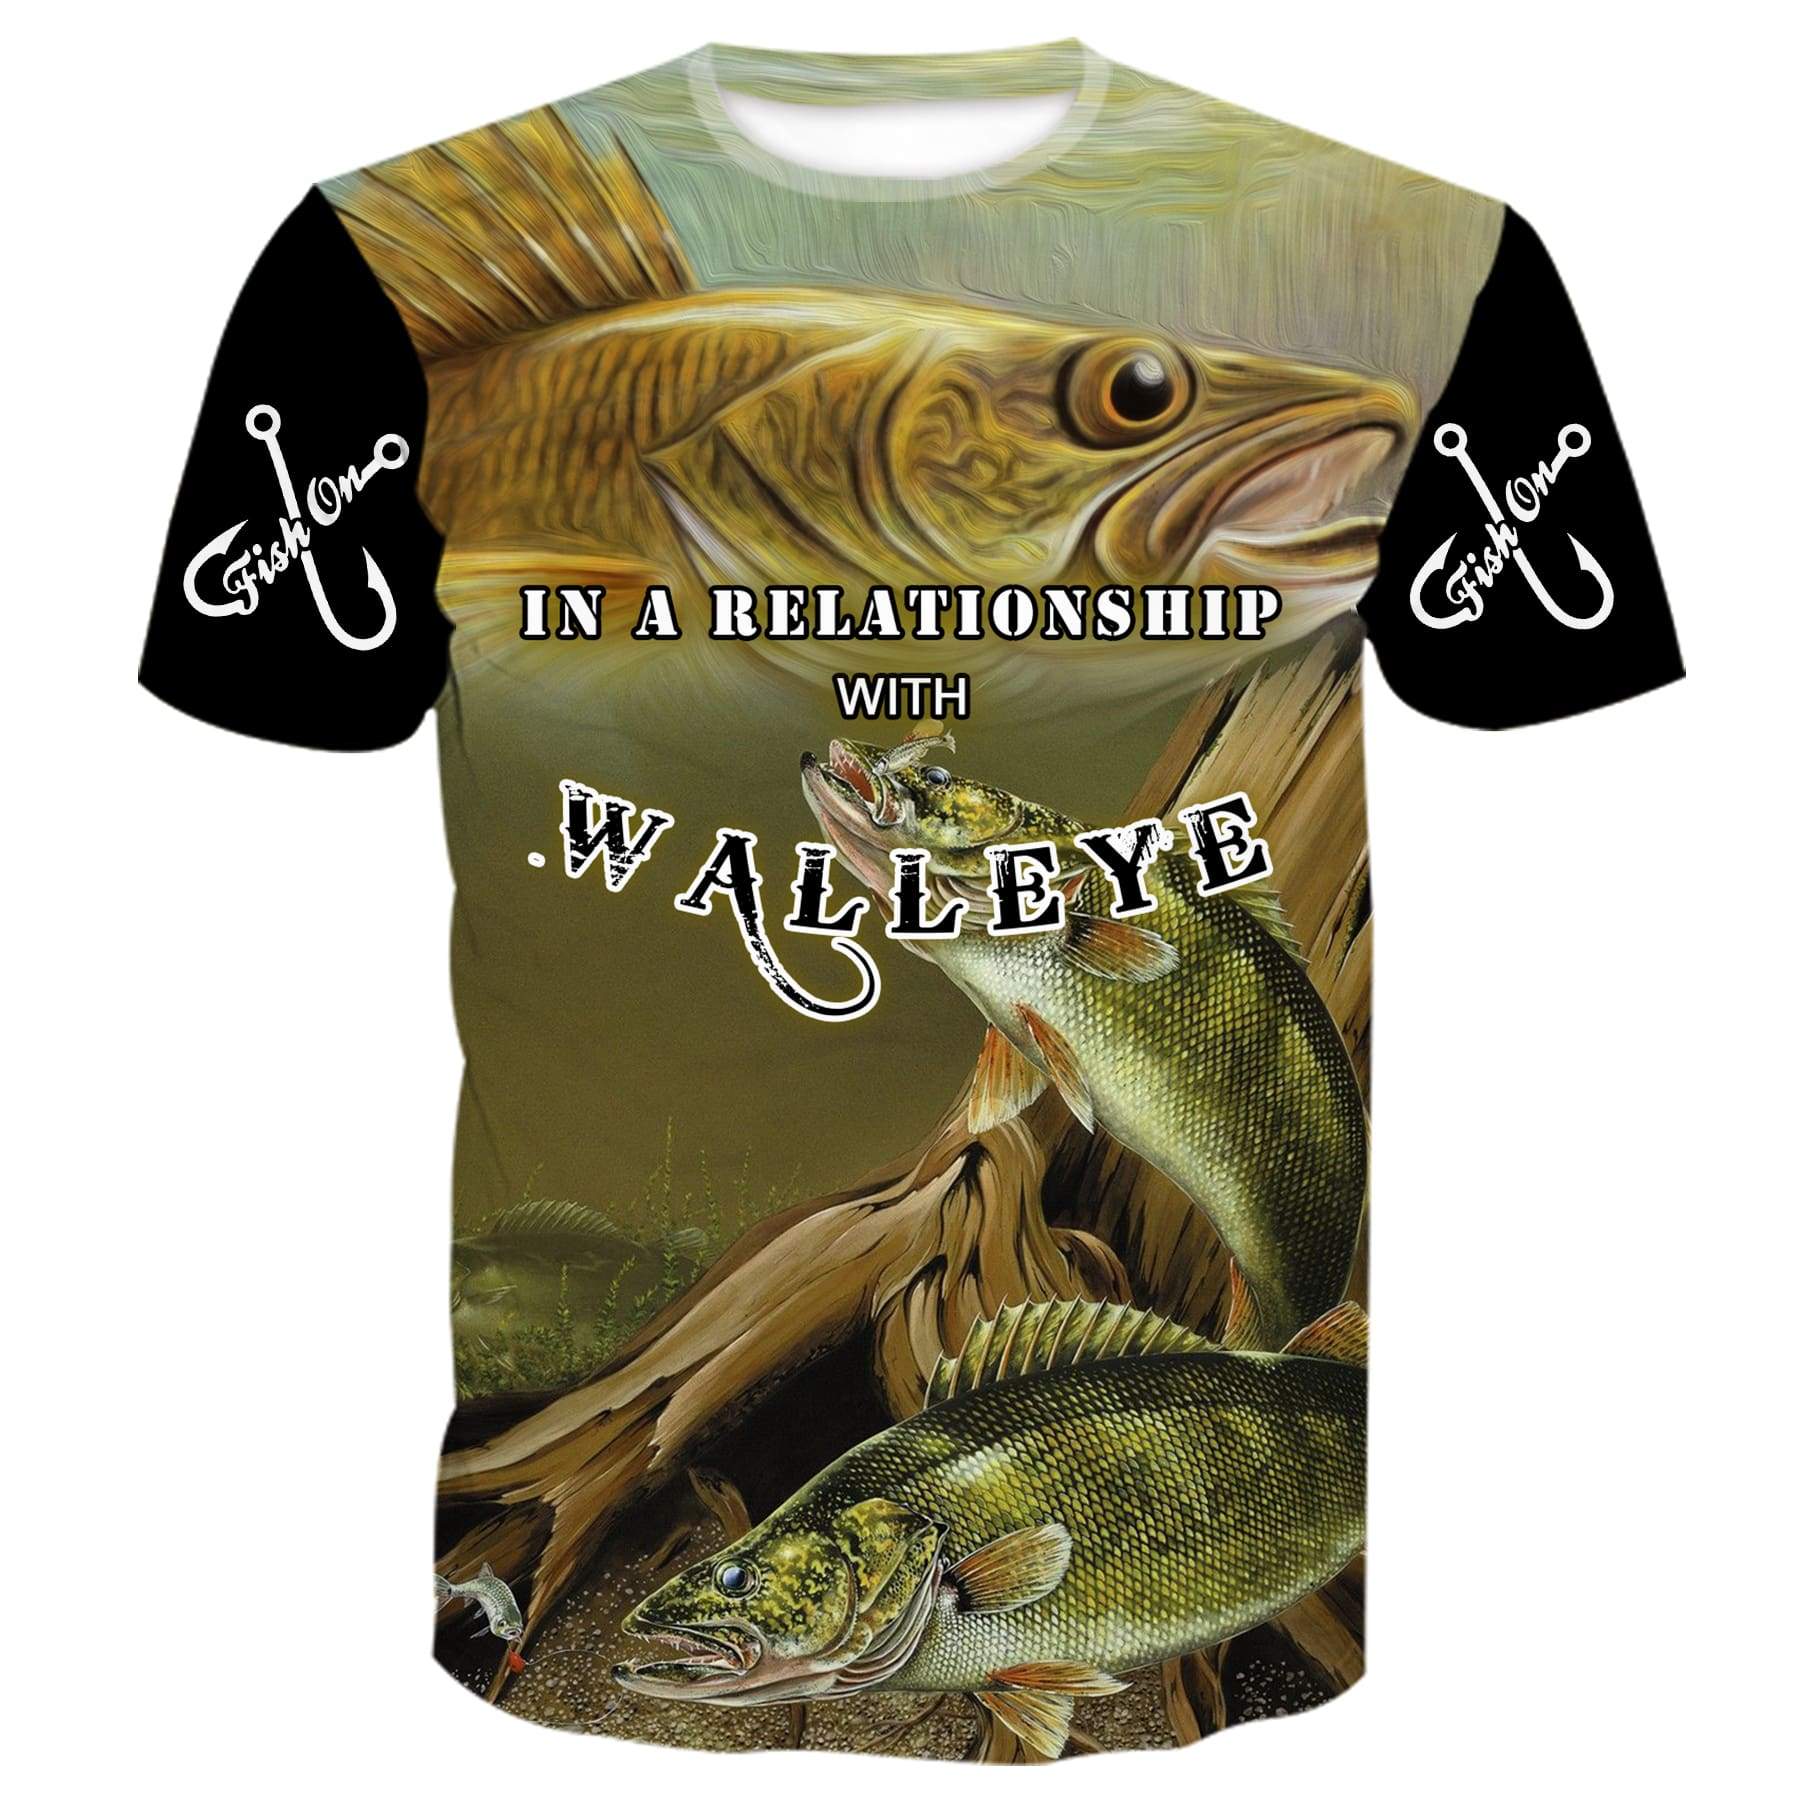 In a relationship with Walleye - Fish on Kid's T-Shirt